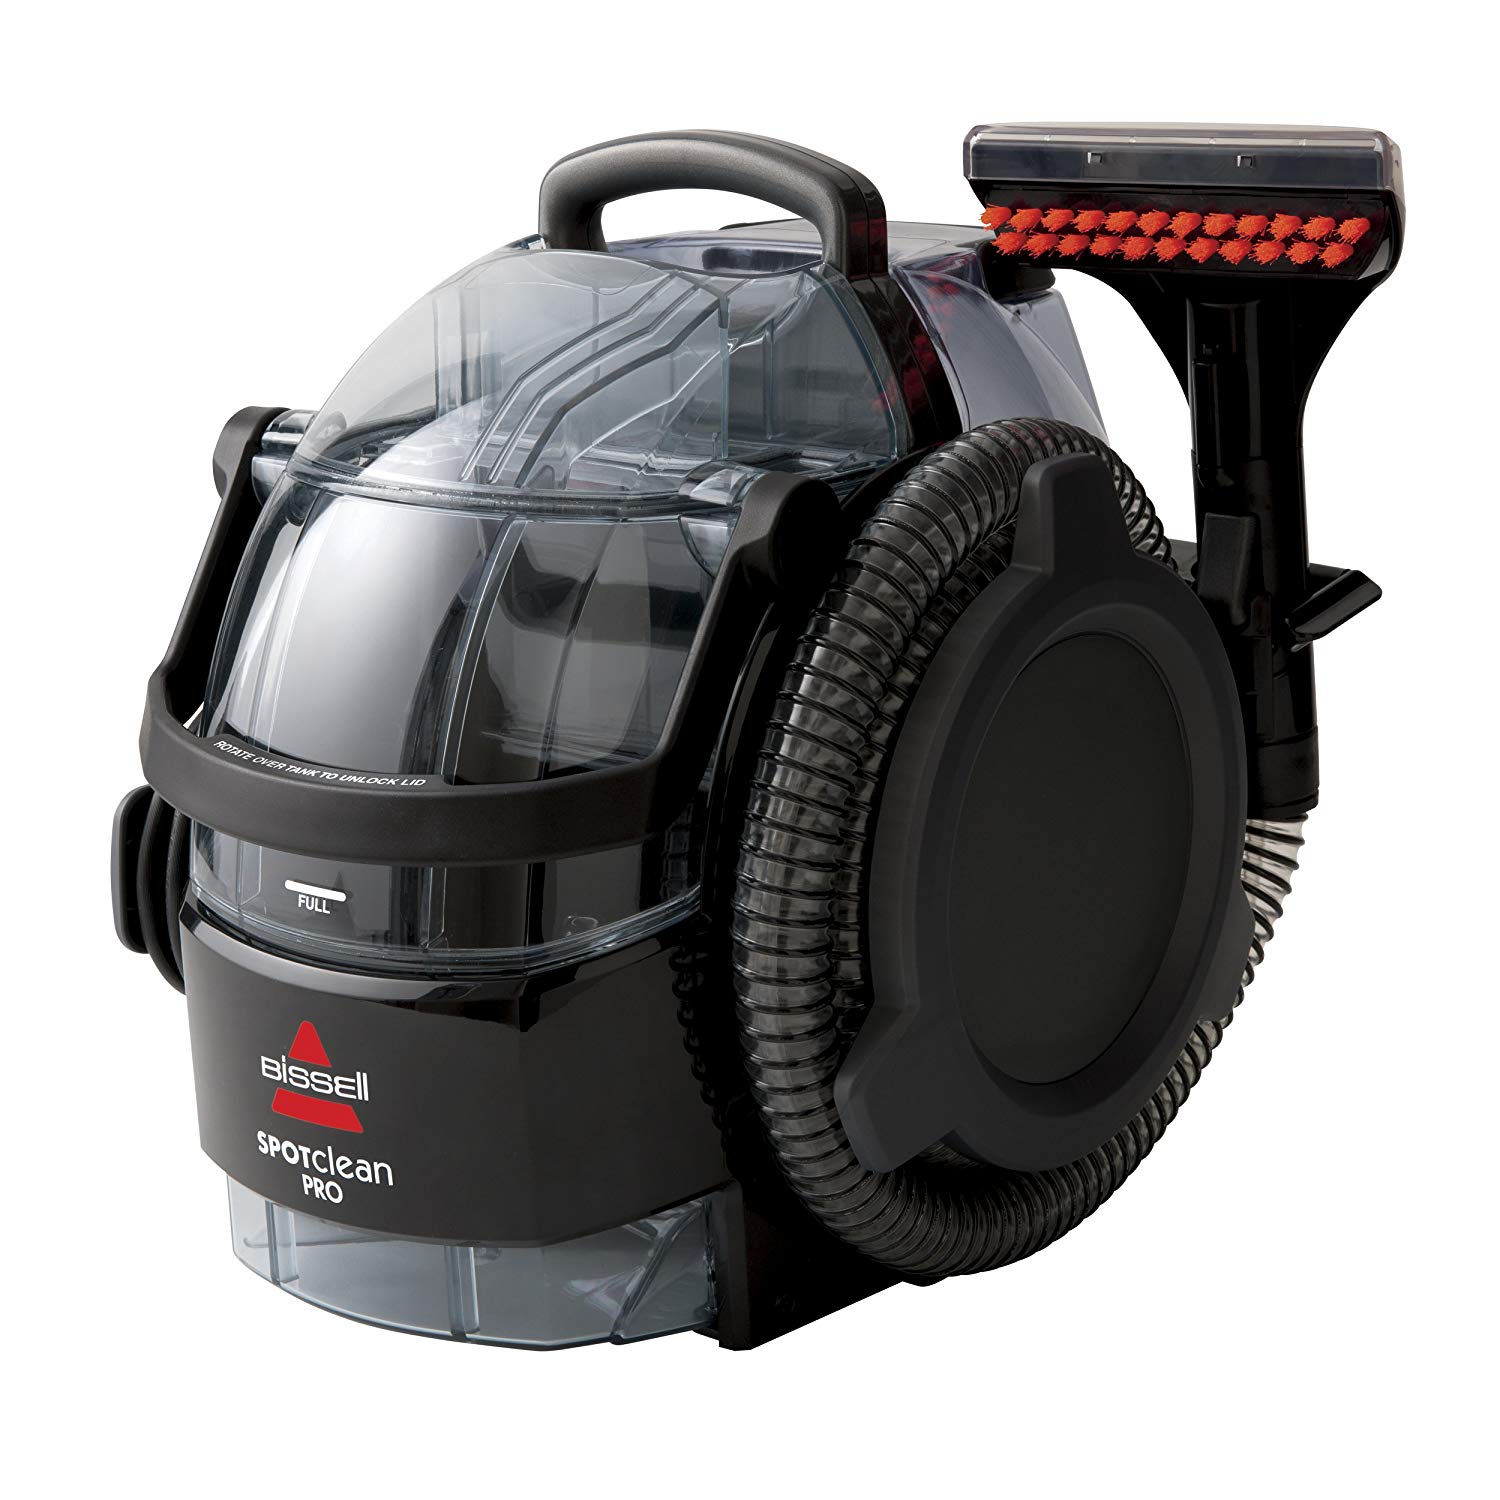 Bissell 3624 SpotClean Professional Portable Carpet Cleaner -- 24% Off $99